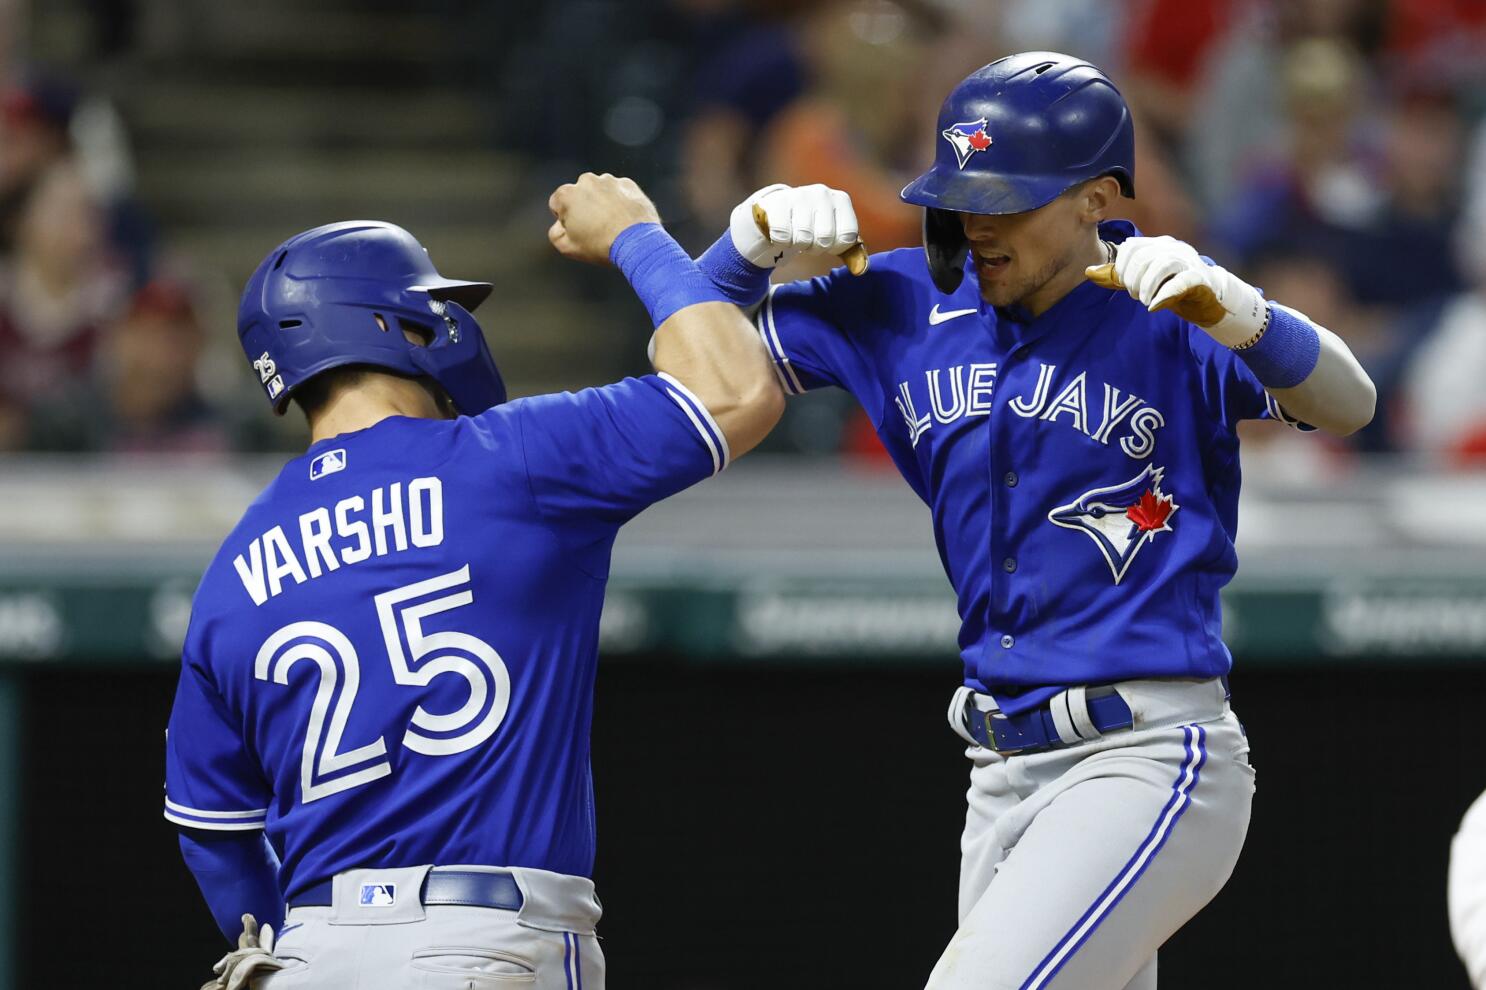 Biggio's homer sends Blue Jays to 3-1 win over Guardians after Ryu exits  with knee injury - The San Diego Union-Tribune